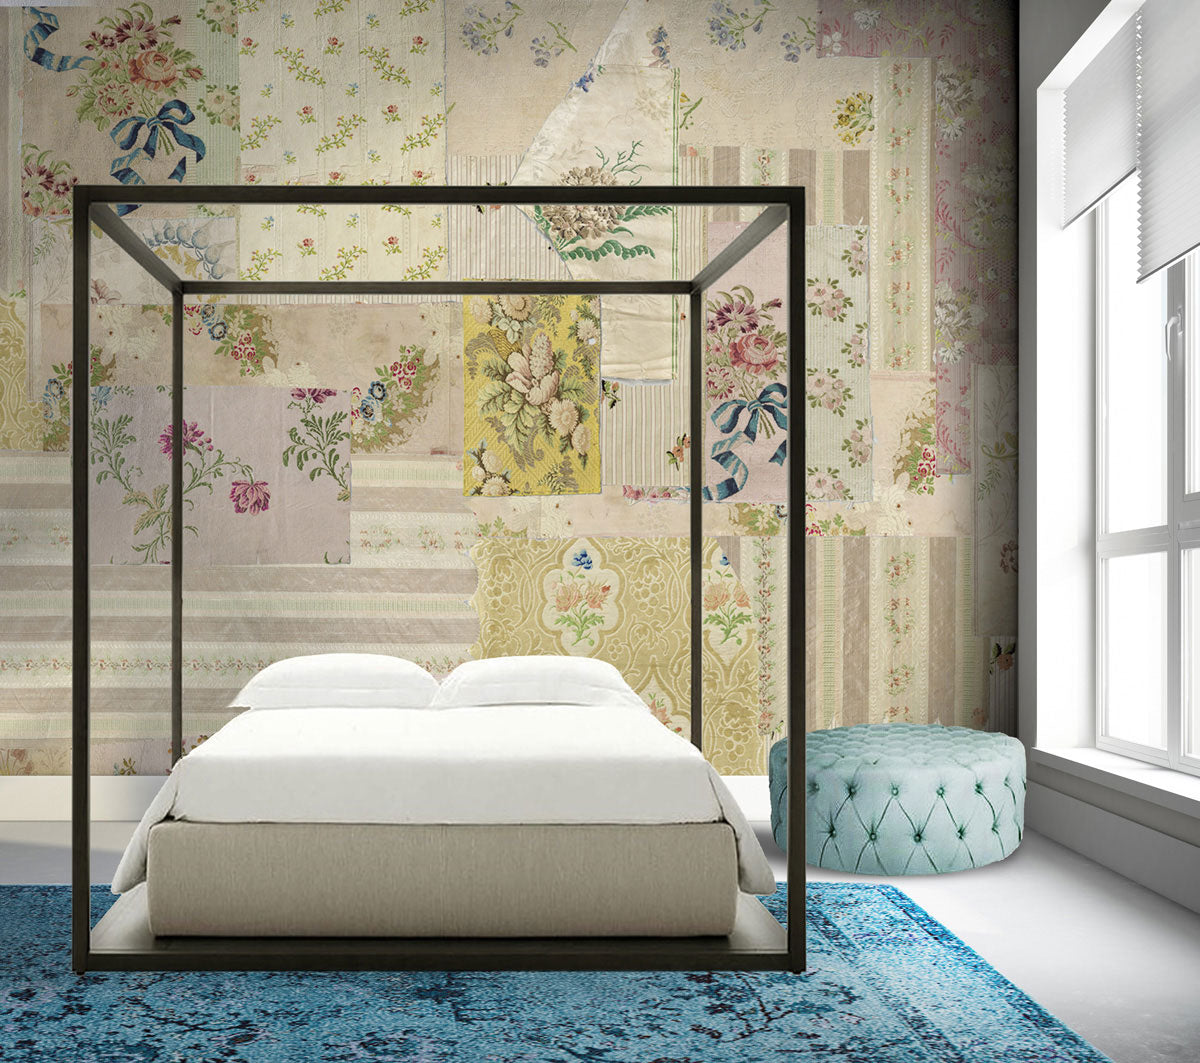 Salon de Couture French Inspired Wall Mural by Back to the Wall